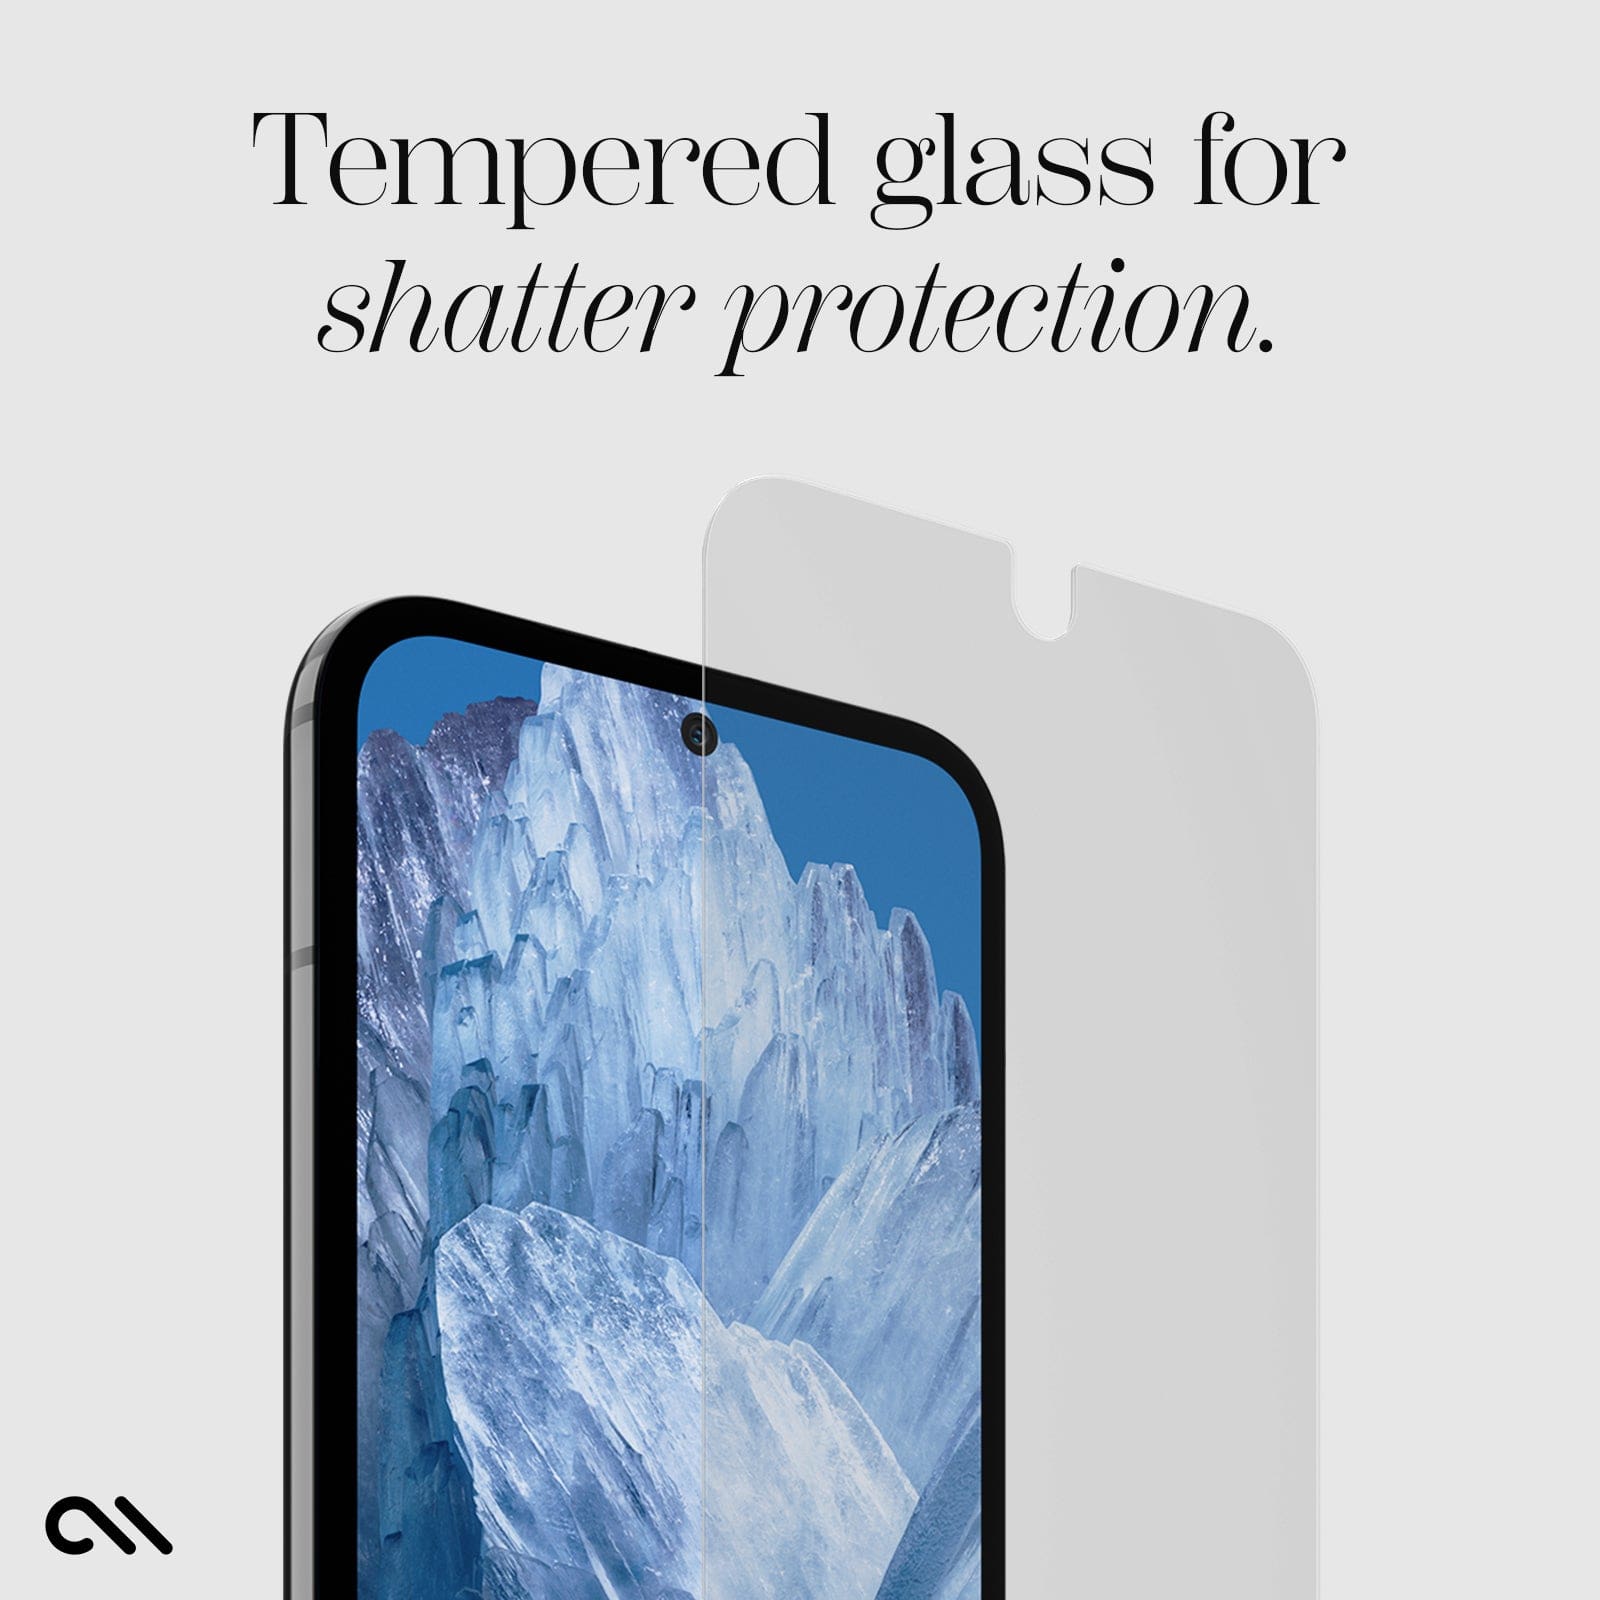 tempered glass for shatter protection